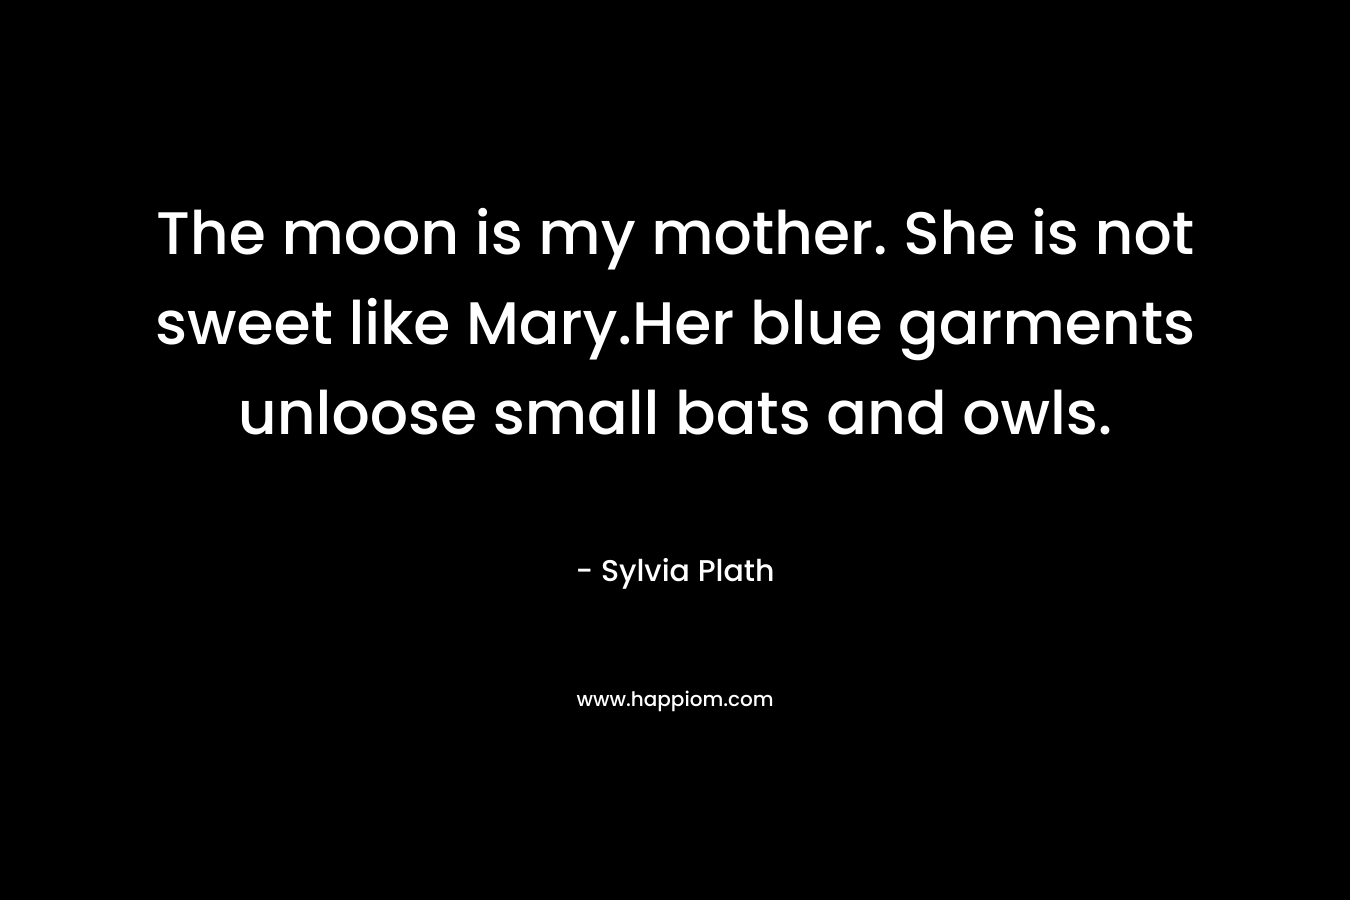 The moon is my mother. She is not sweet like Mary.Her blue garments unloose small bats and owls. – Sylvia Plath